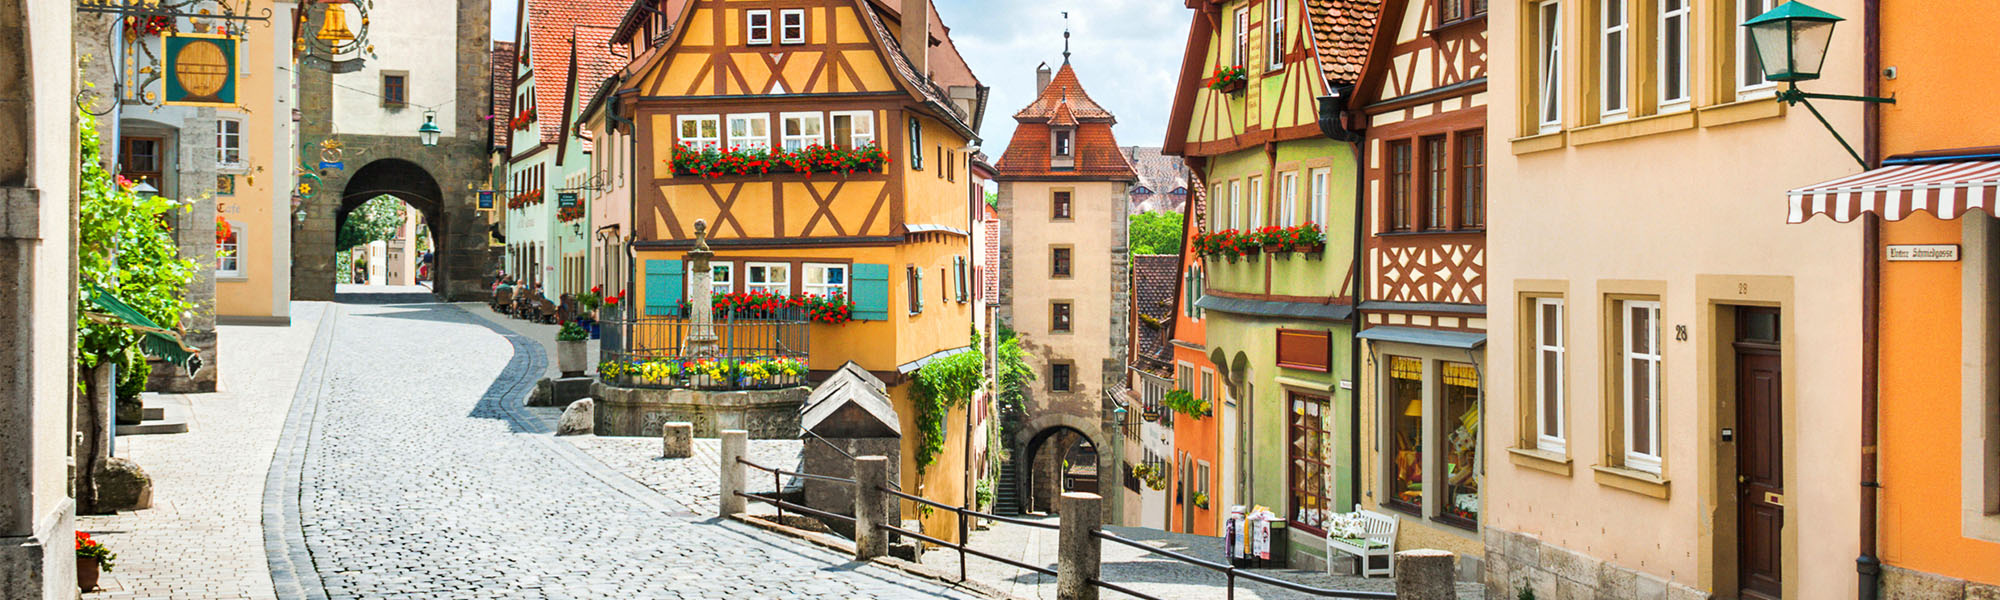 tourhub | Just Go Holidays | Germany's Romantic Road, Munich & Lake Constance Inclusive 